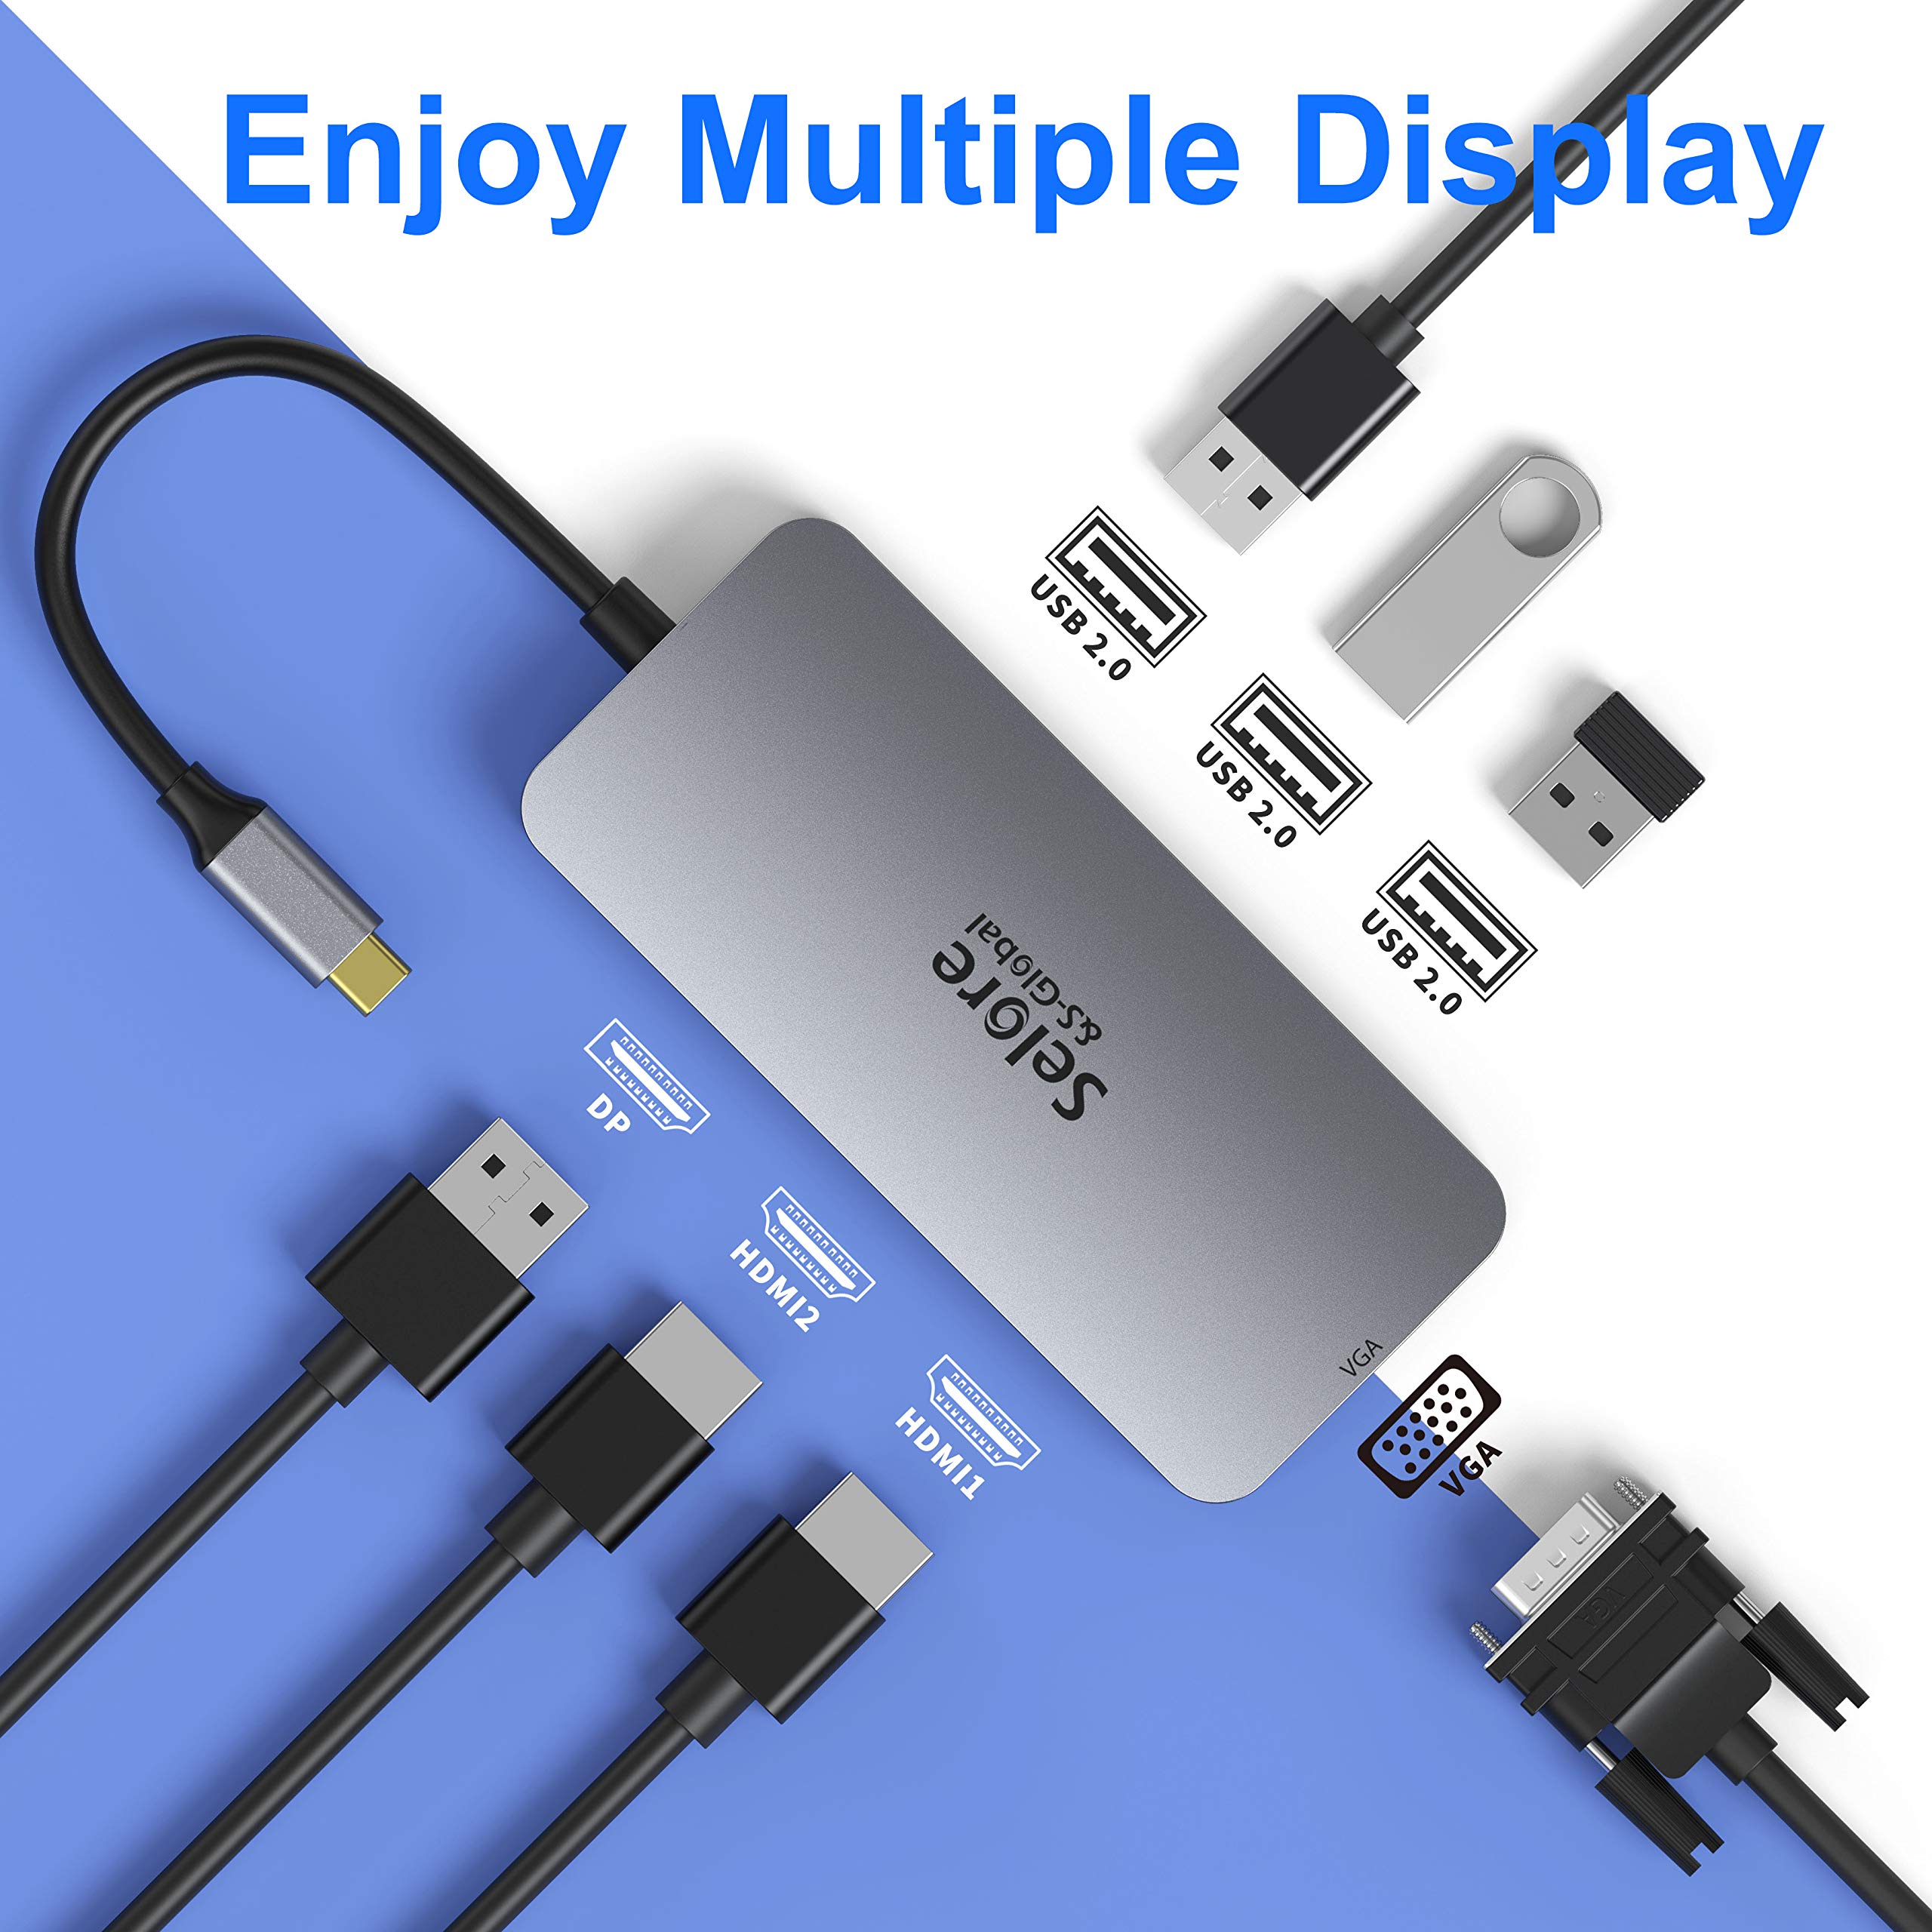 USB C to Dual HDMI Adapter,7 in 1 USB C Docking Station to Dual HDMI Displayport VGA Adapter,USB C to 3USB 2.0, Multi Monitor Adapter for Dell XPS 13 15,Lenovo Yoga,Huawei Matebook X pro,etc